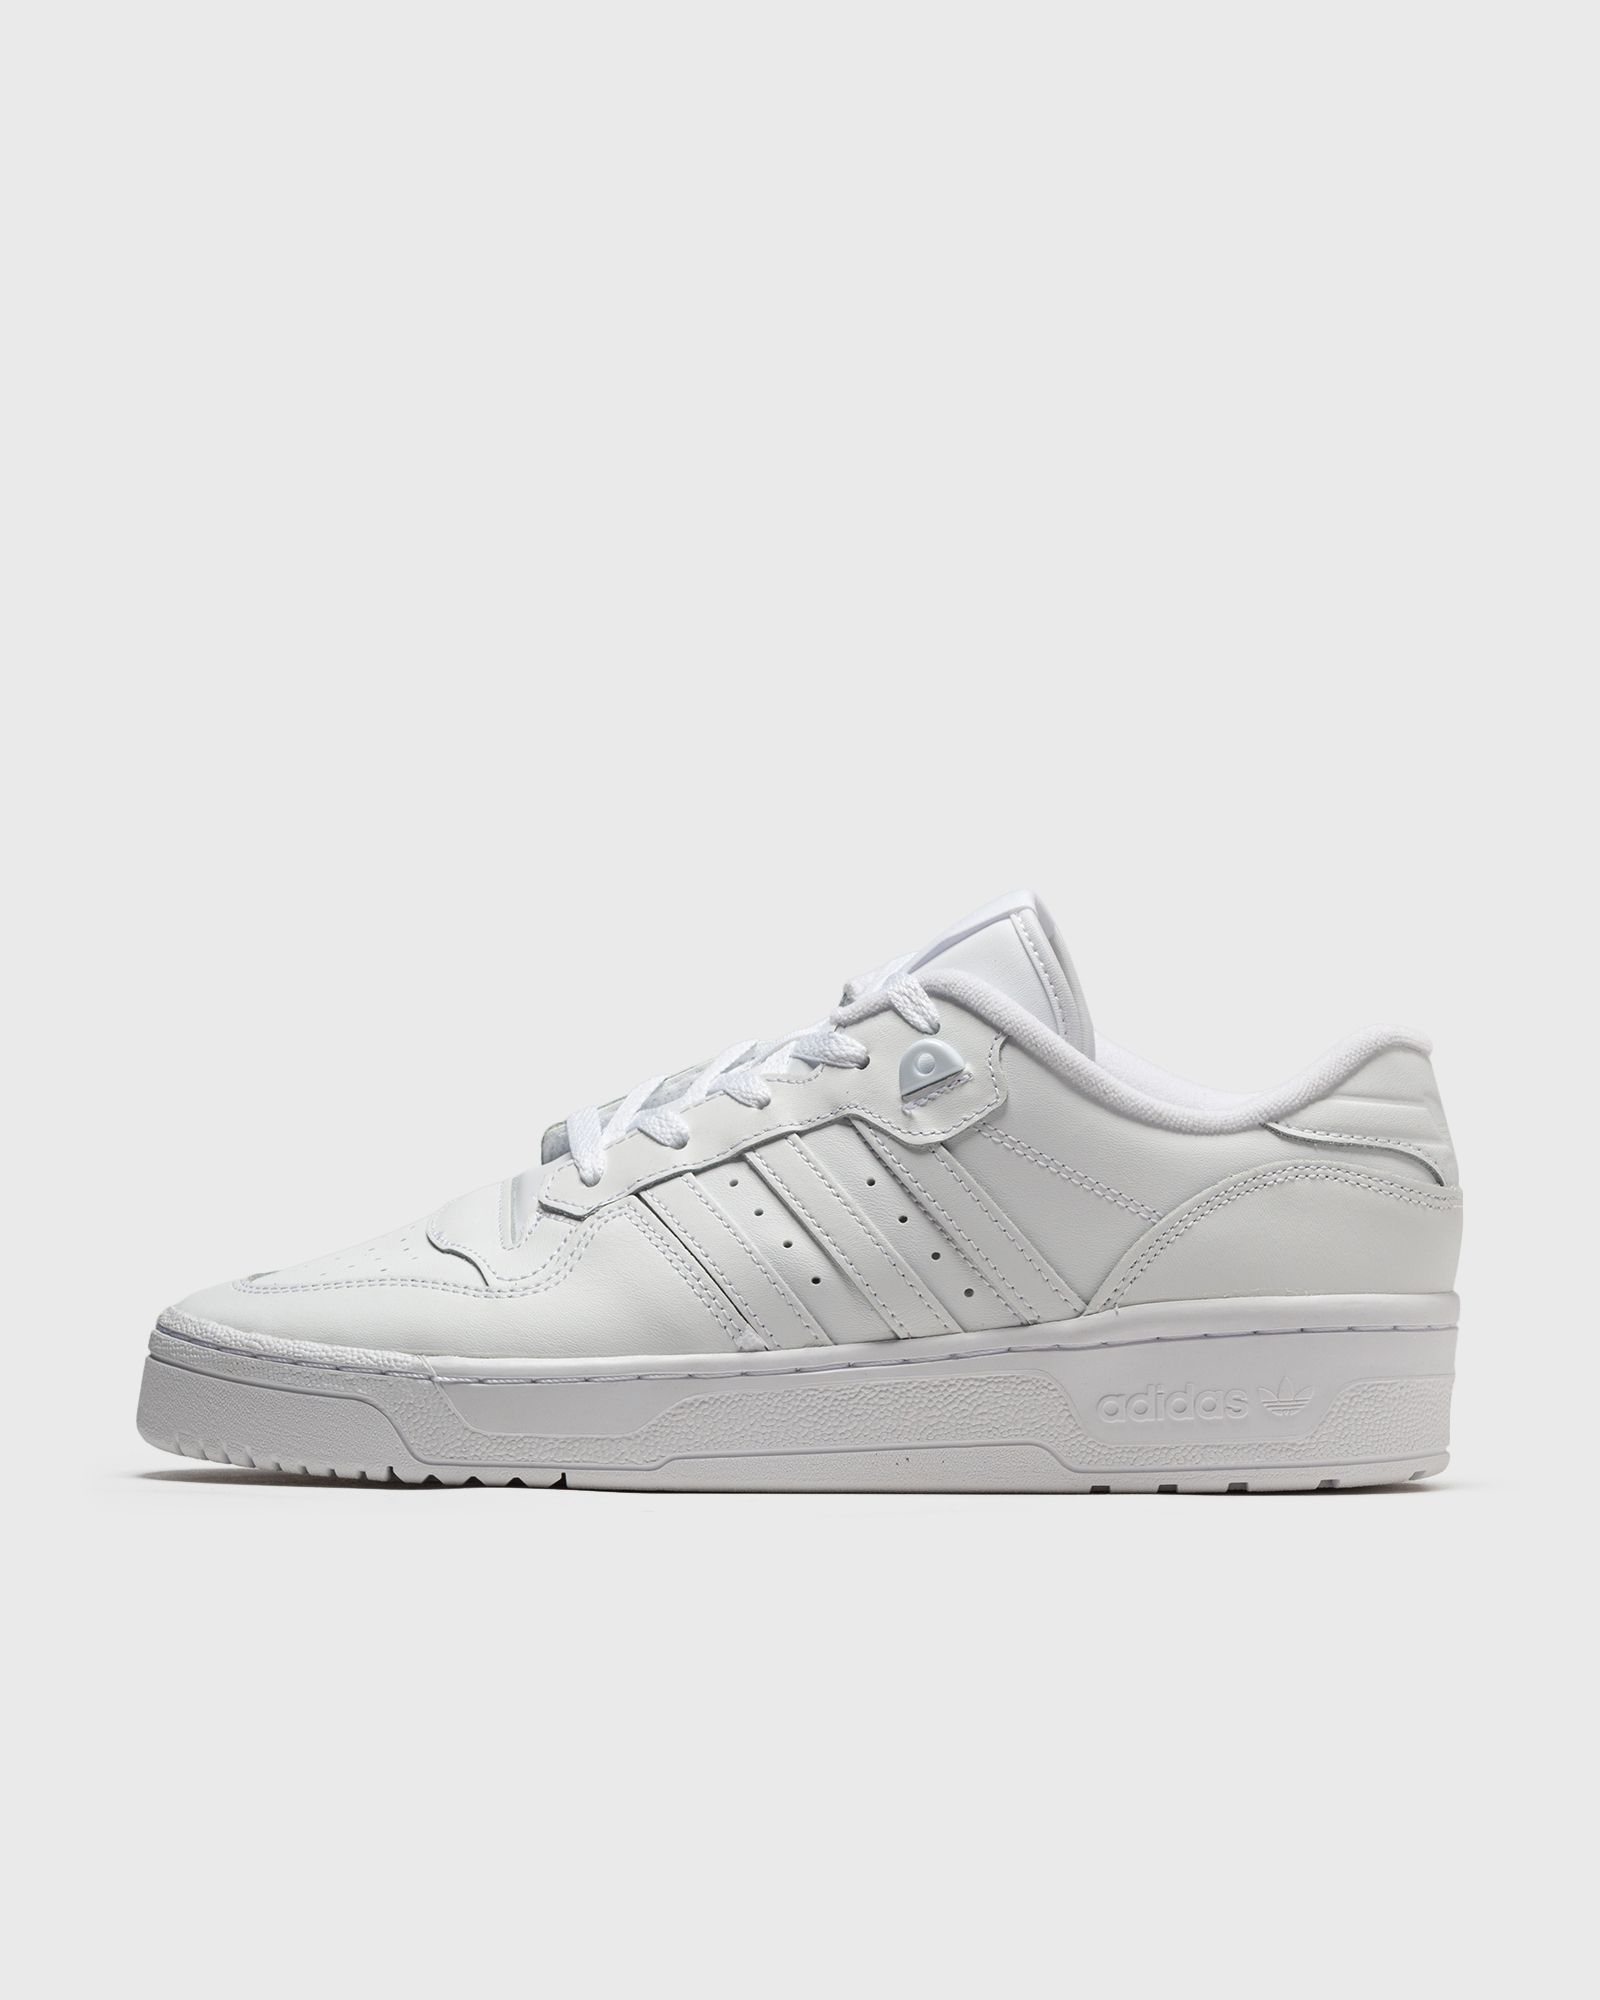 Adidas - rivalry low men basketball|lowtop white in größe:41 1/3